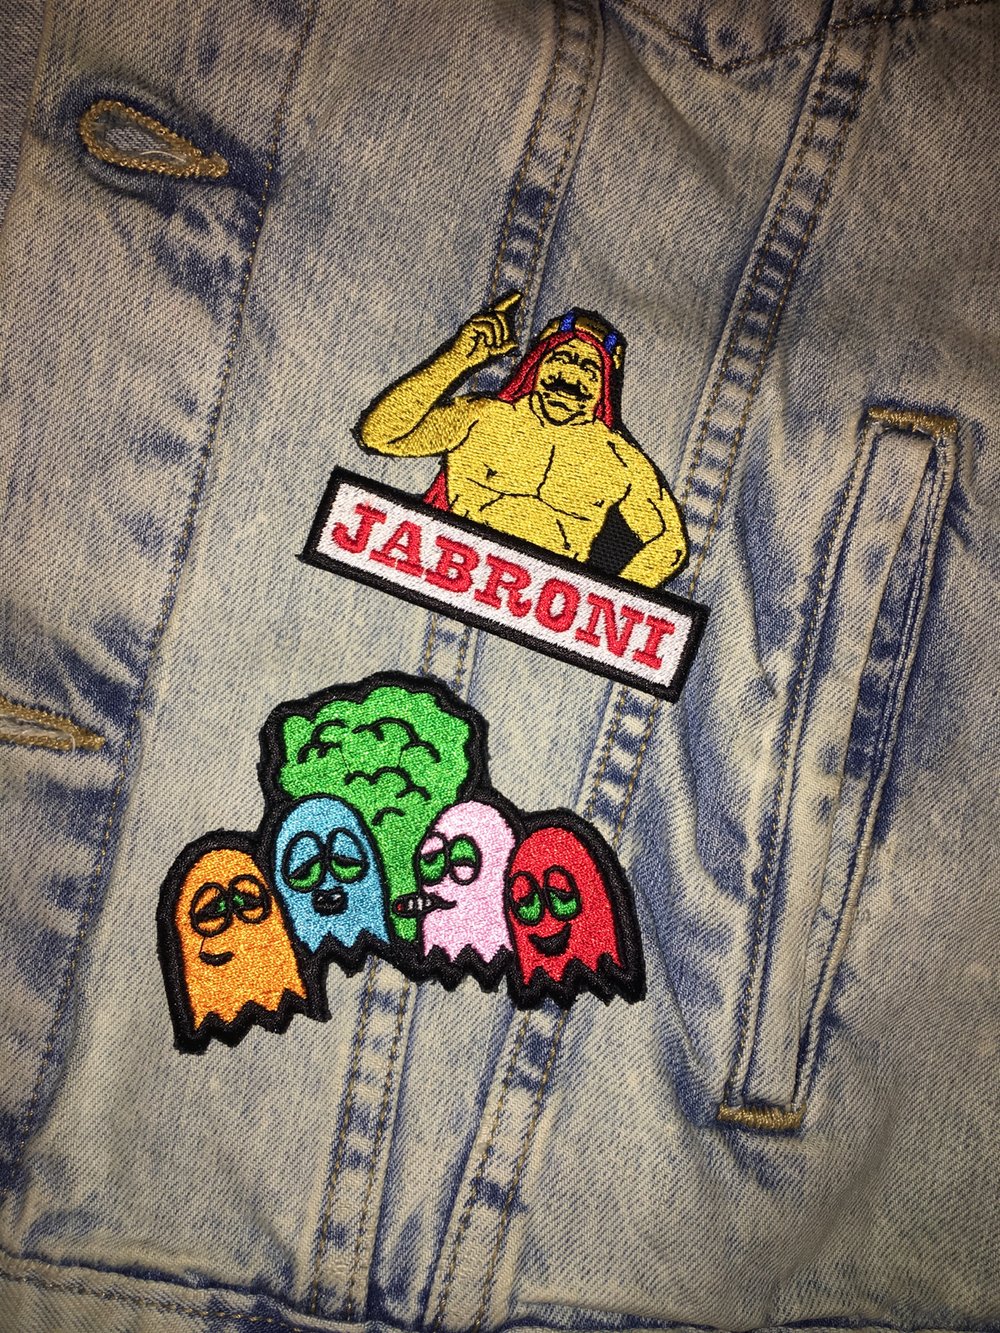 Bad Pins Patches